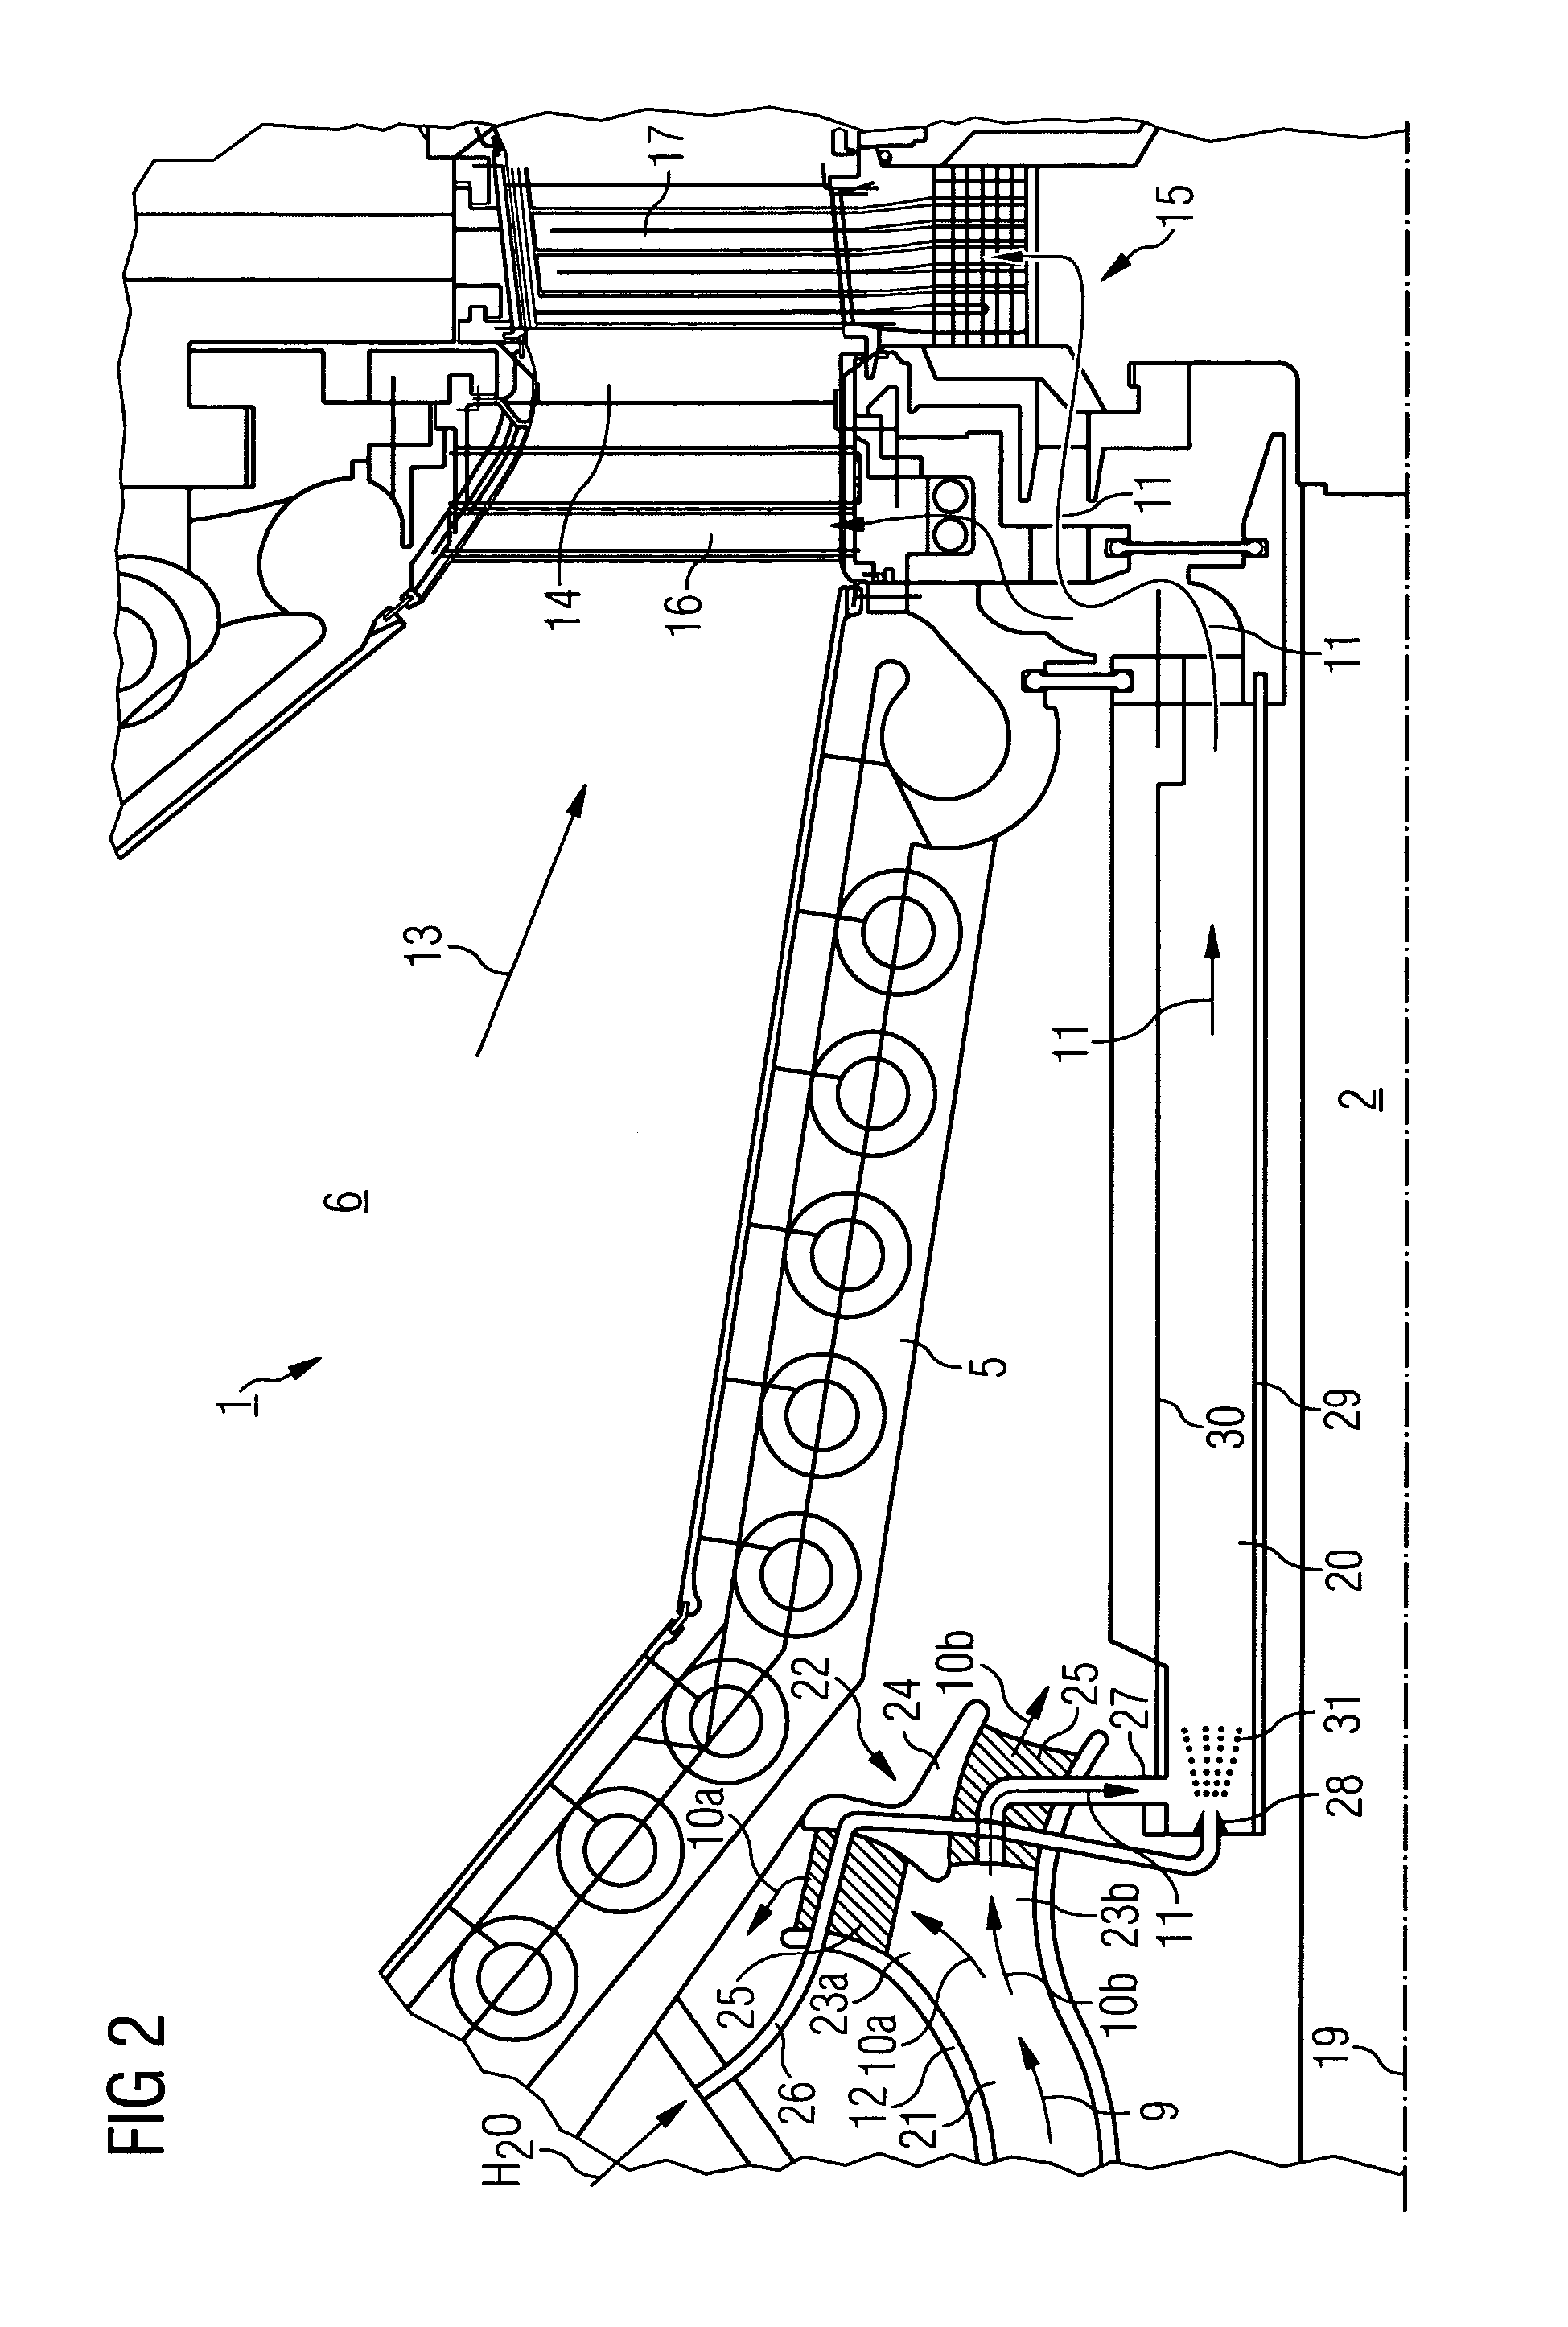 Cooling air and injected liquid system for gas turbine blades